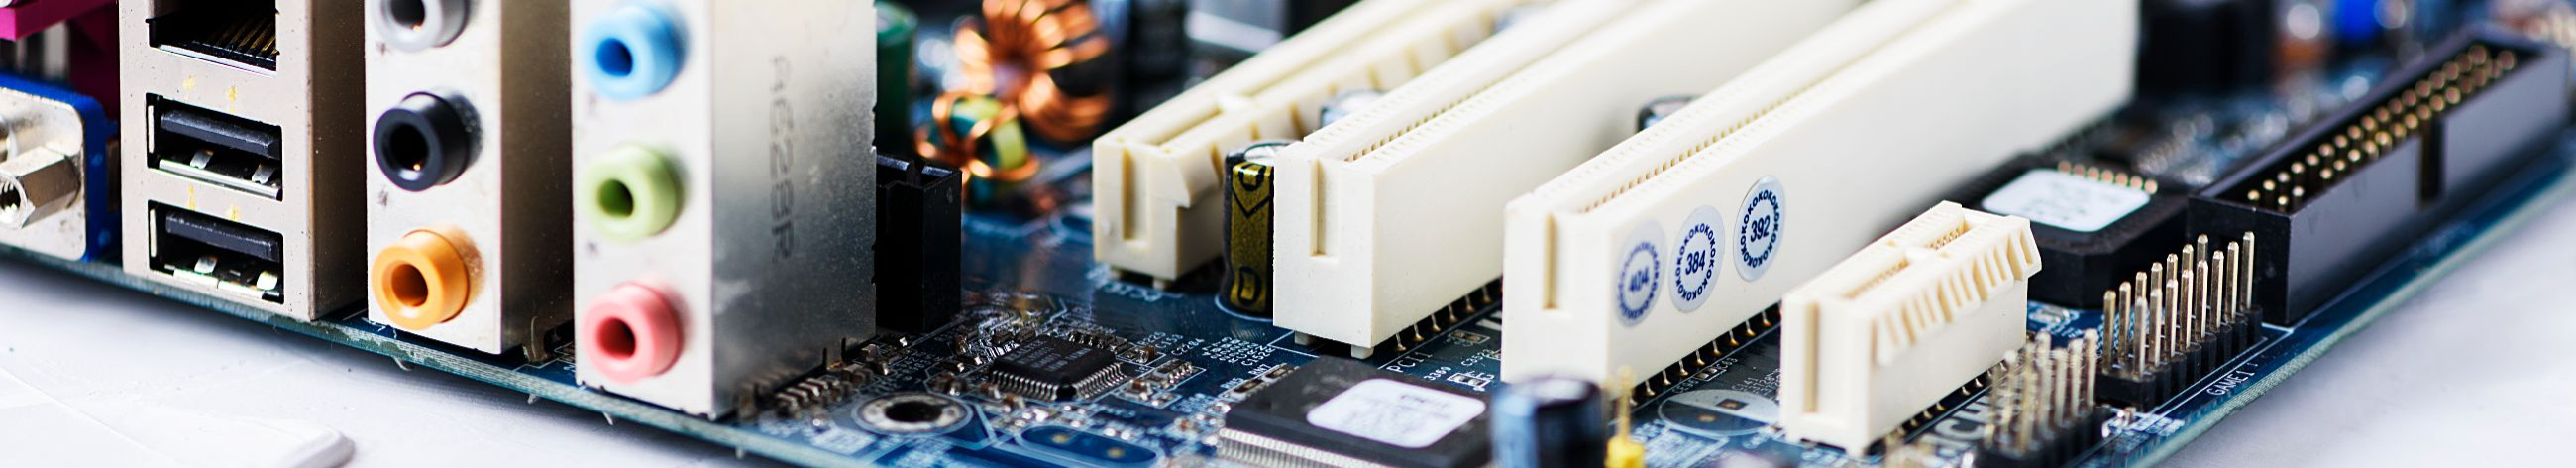 We offer comprehensive computer maintenance and repair, server maintenance, and development work, ensuring optimal performance and reliability.